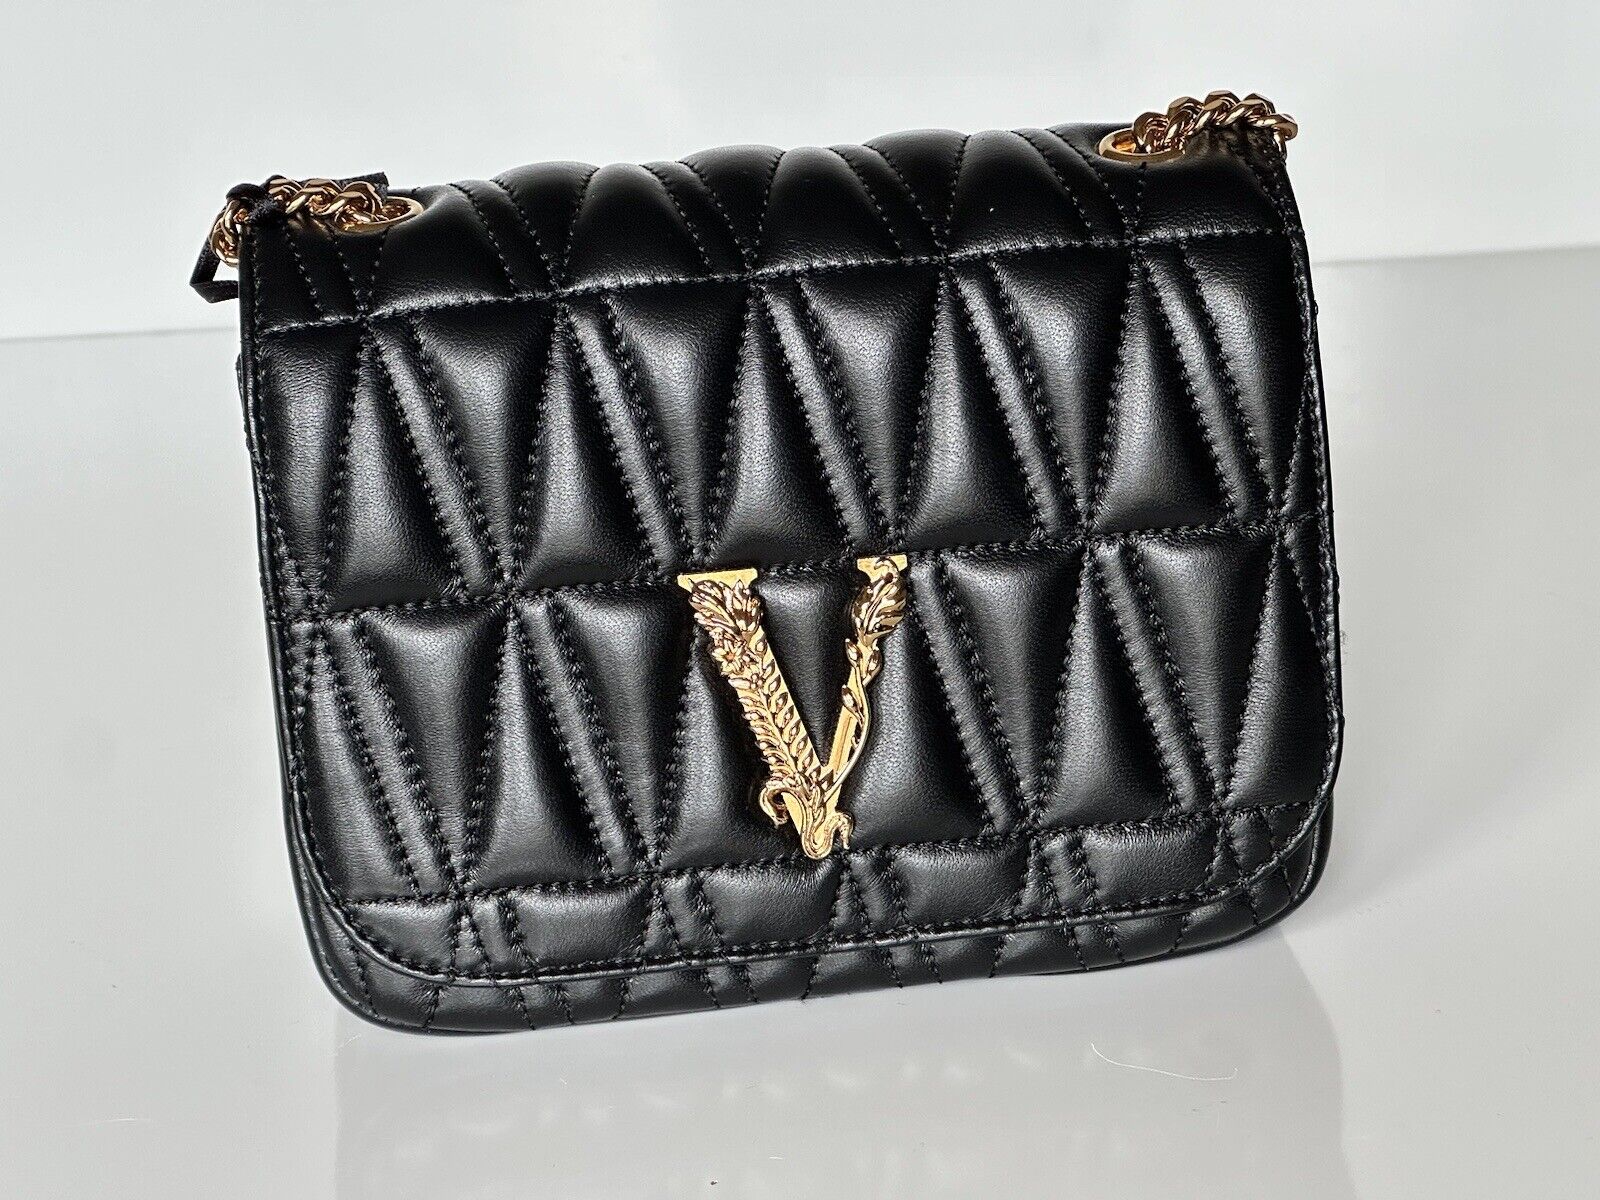 Versace Virtus Quilted Leather Black Crossbody Shoulder Bag DBFH821 NWT $1925 IT